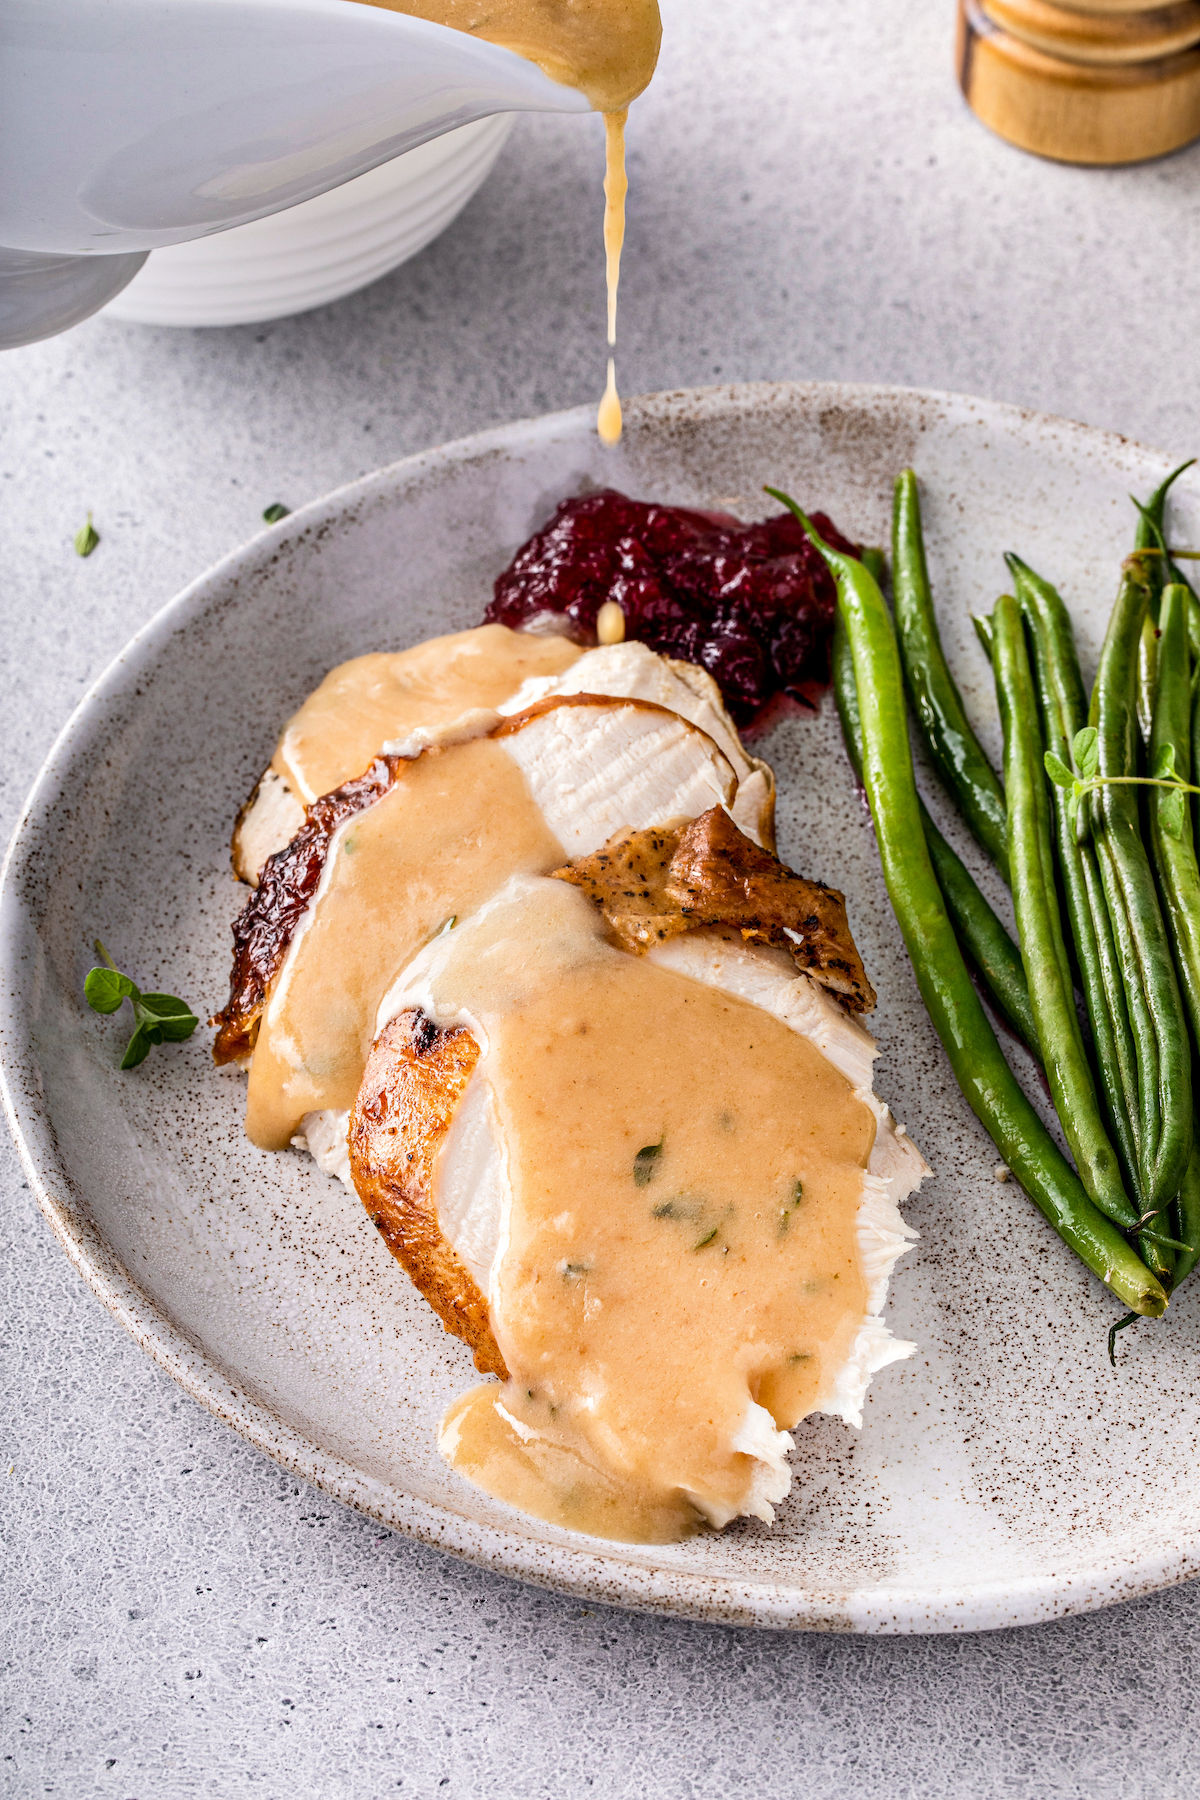 Sliced turkey on a dinner plate, topped with homemade gravy.